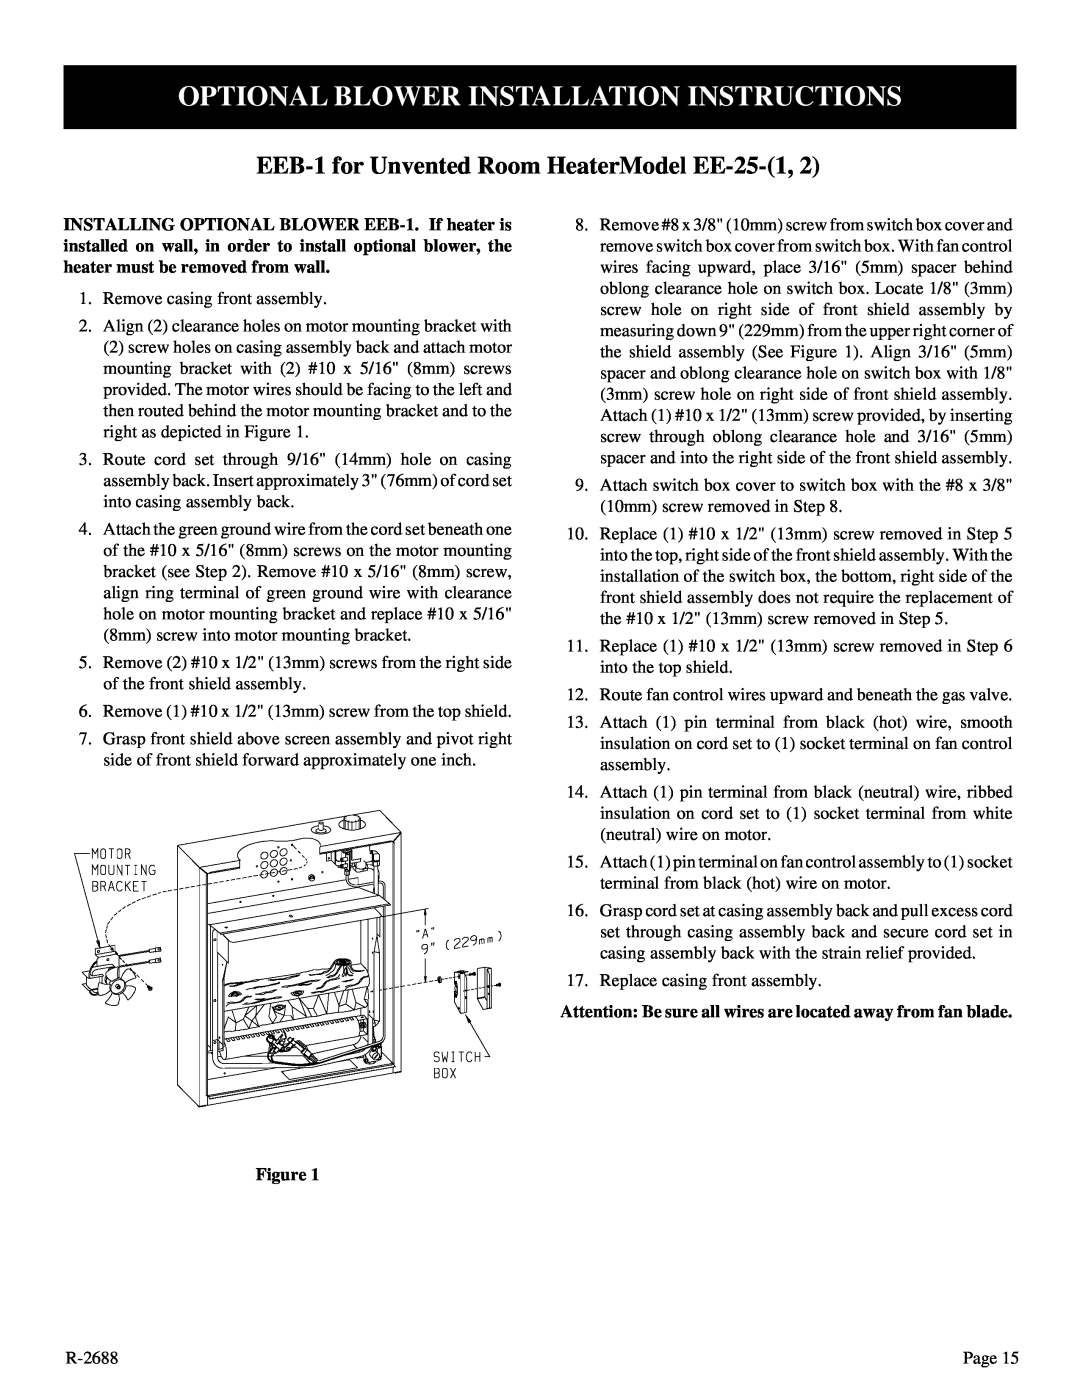 Empire Products EE-25-2 Optional Blower Installation Instructions, EEB-1for Unvented Room HeaterModel EE-25-1,2 